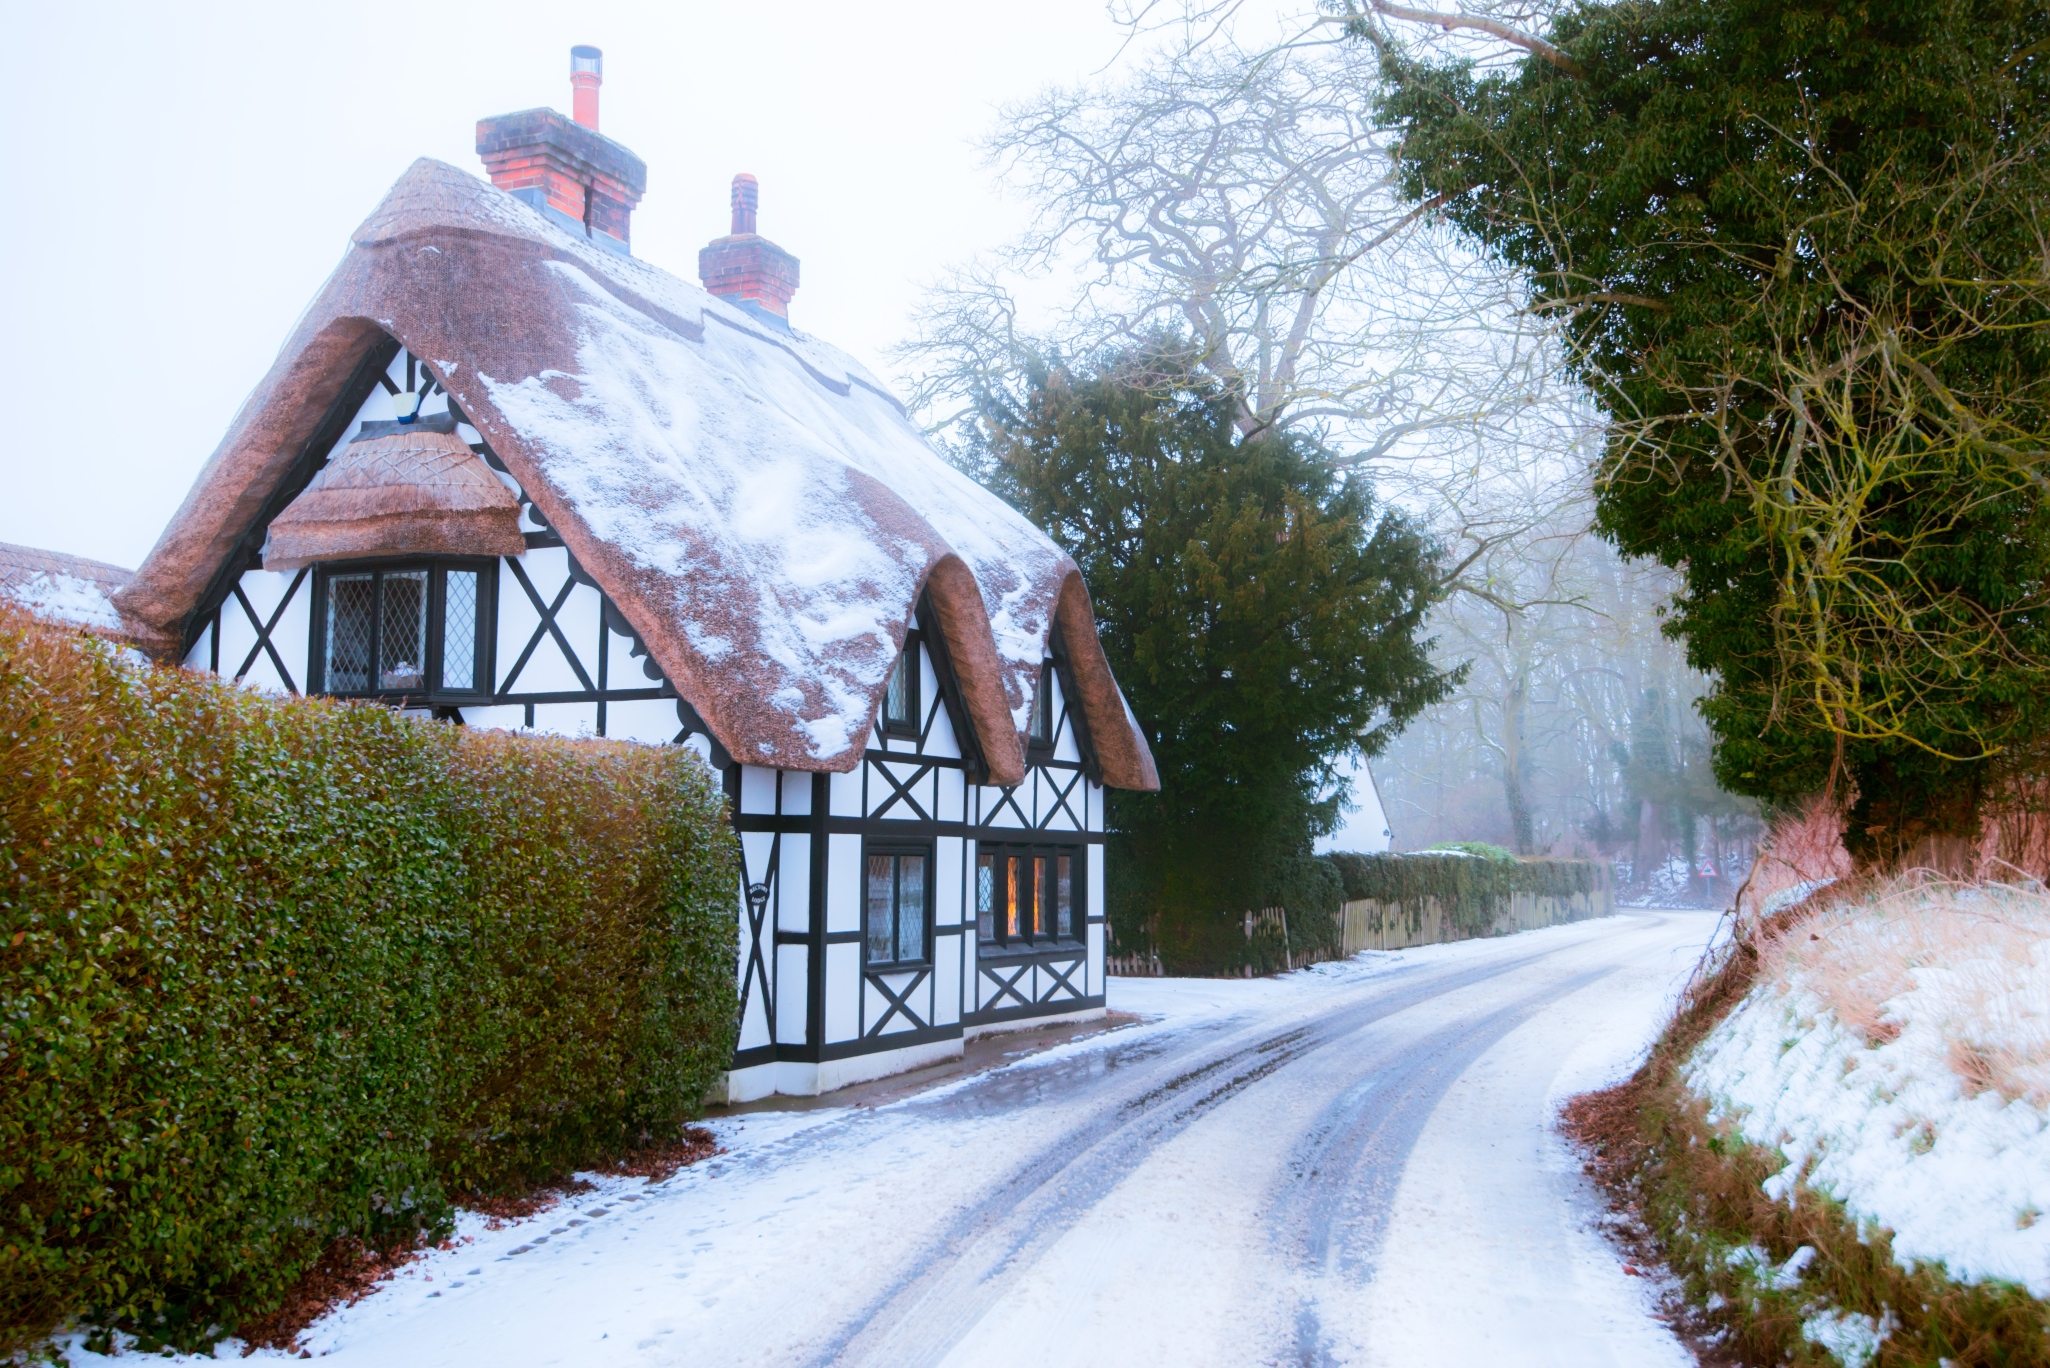 Snow-covered thatched timber frame cottage